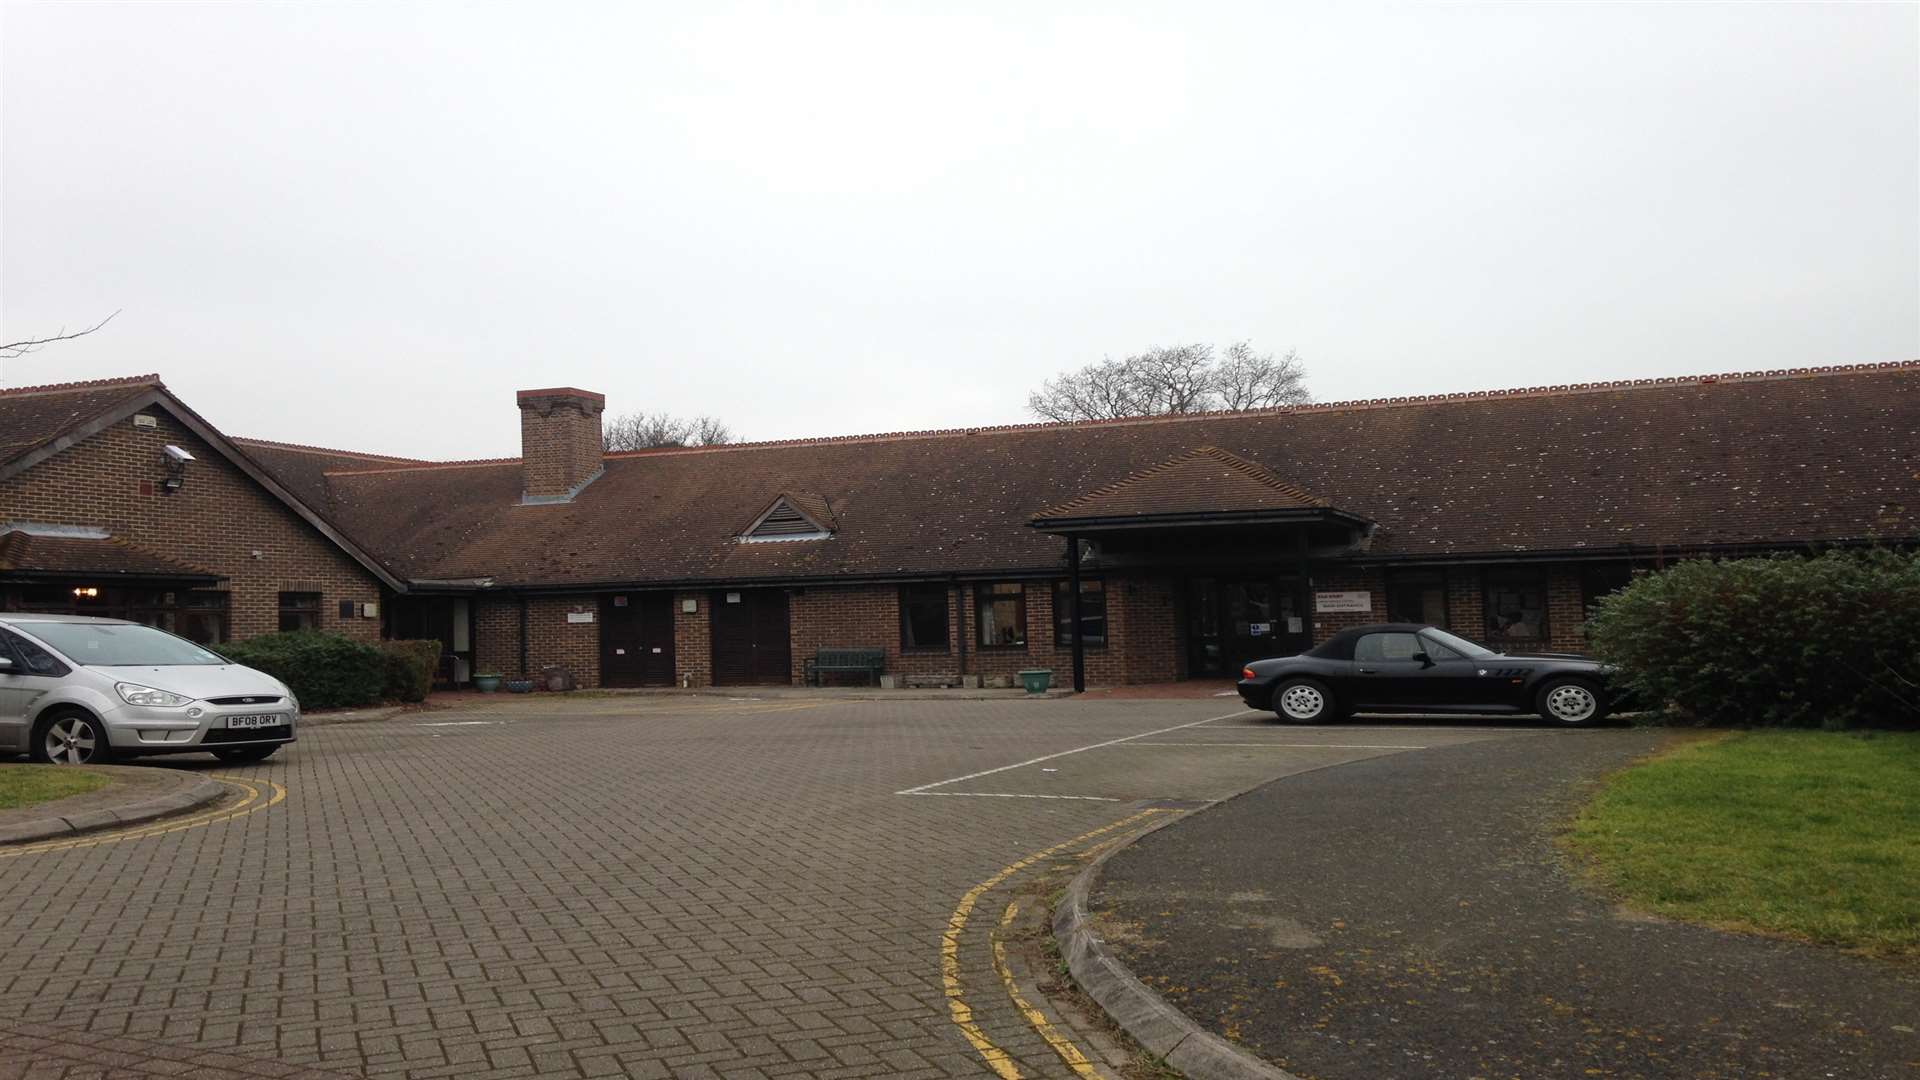 The Kiln Court Care Home in Faversham